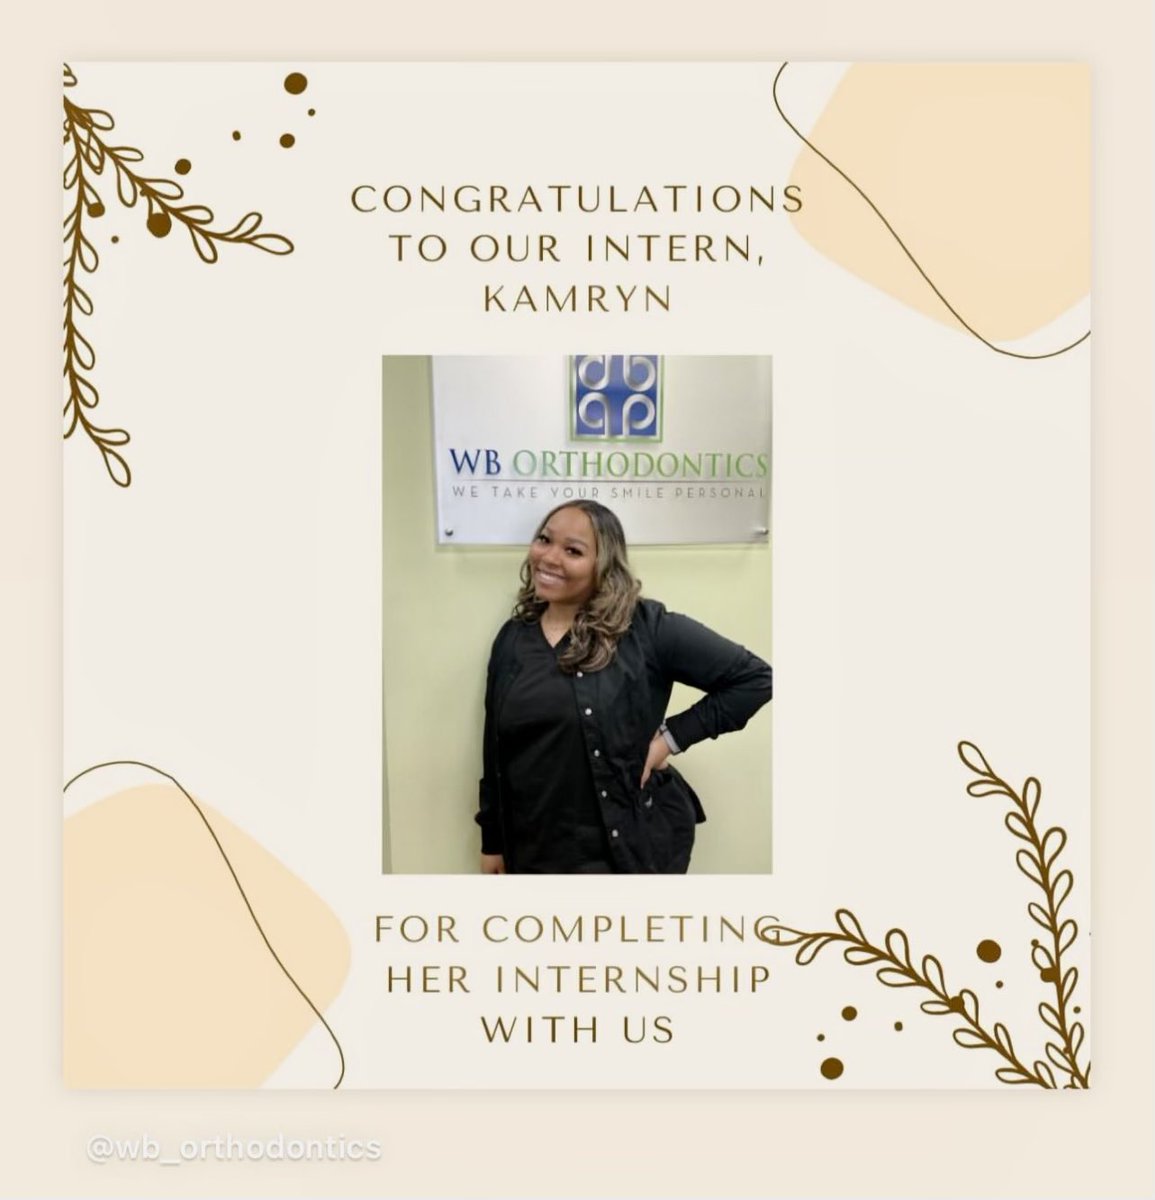 Congratulations to our scholar Kamryn Bailey on completing her internship!
#scholar #KLMSF